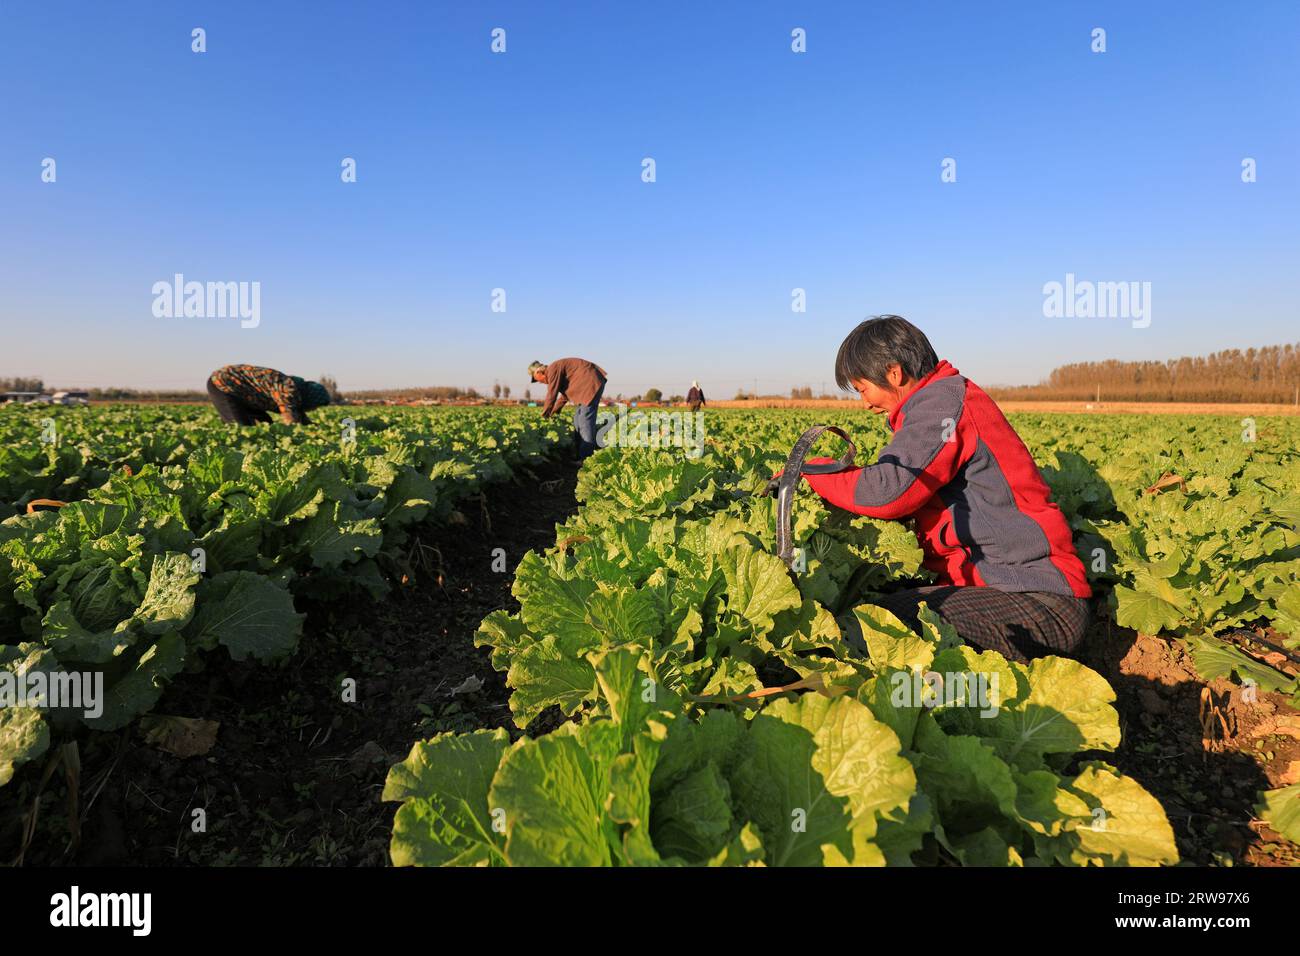 LUANNAN COUNTY, China - 22. Oktober 2021: Farmers Tidy up Tropf Bewässerung Pipes in Chinese Cabbage Fields, North China Stockfoto